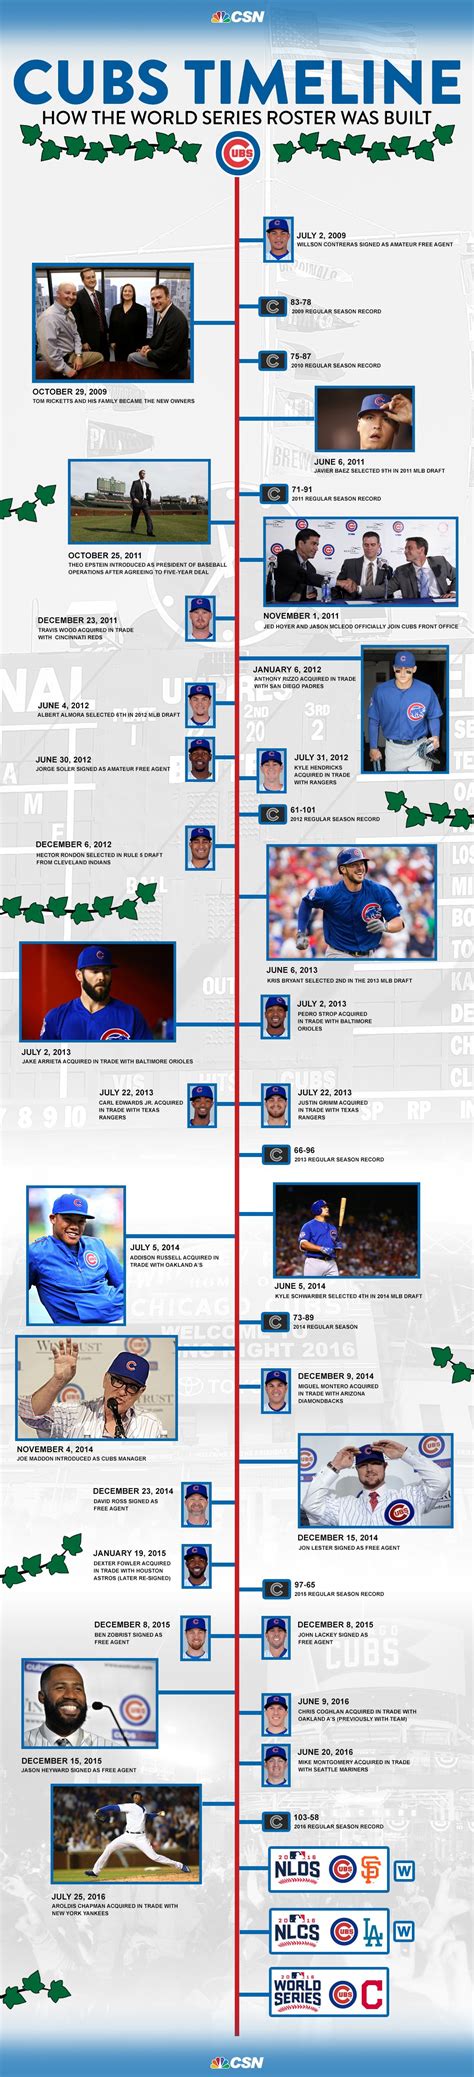 Cubs Timeline: How the World Series roster was built | CSN Chicago | Chicago cubs fans, Chicago ...